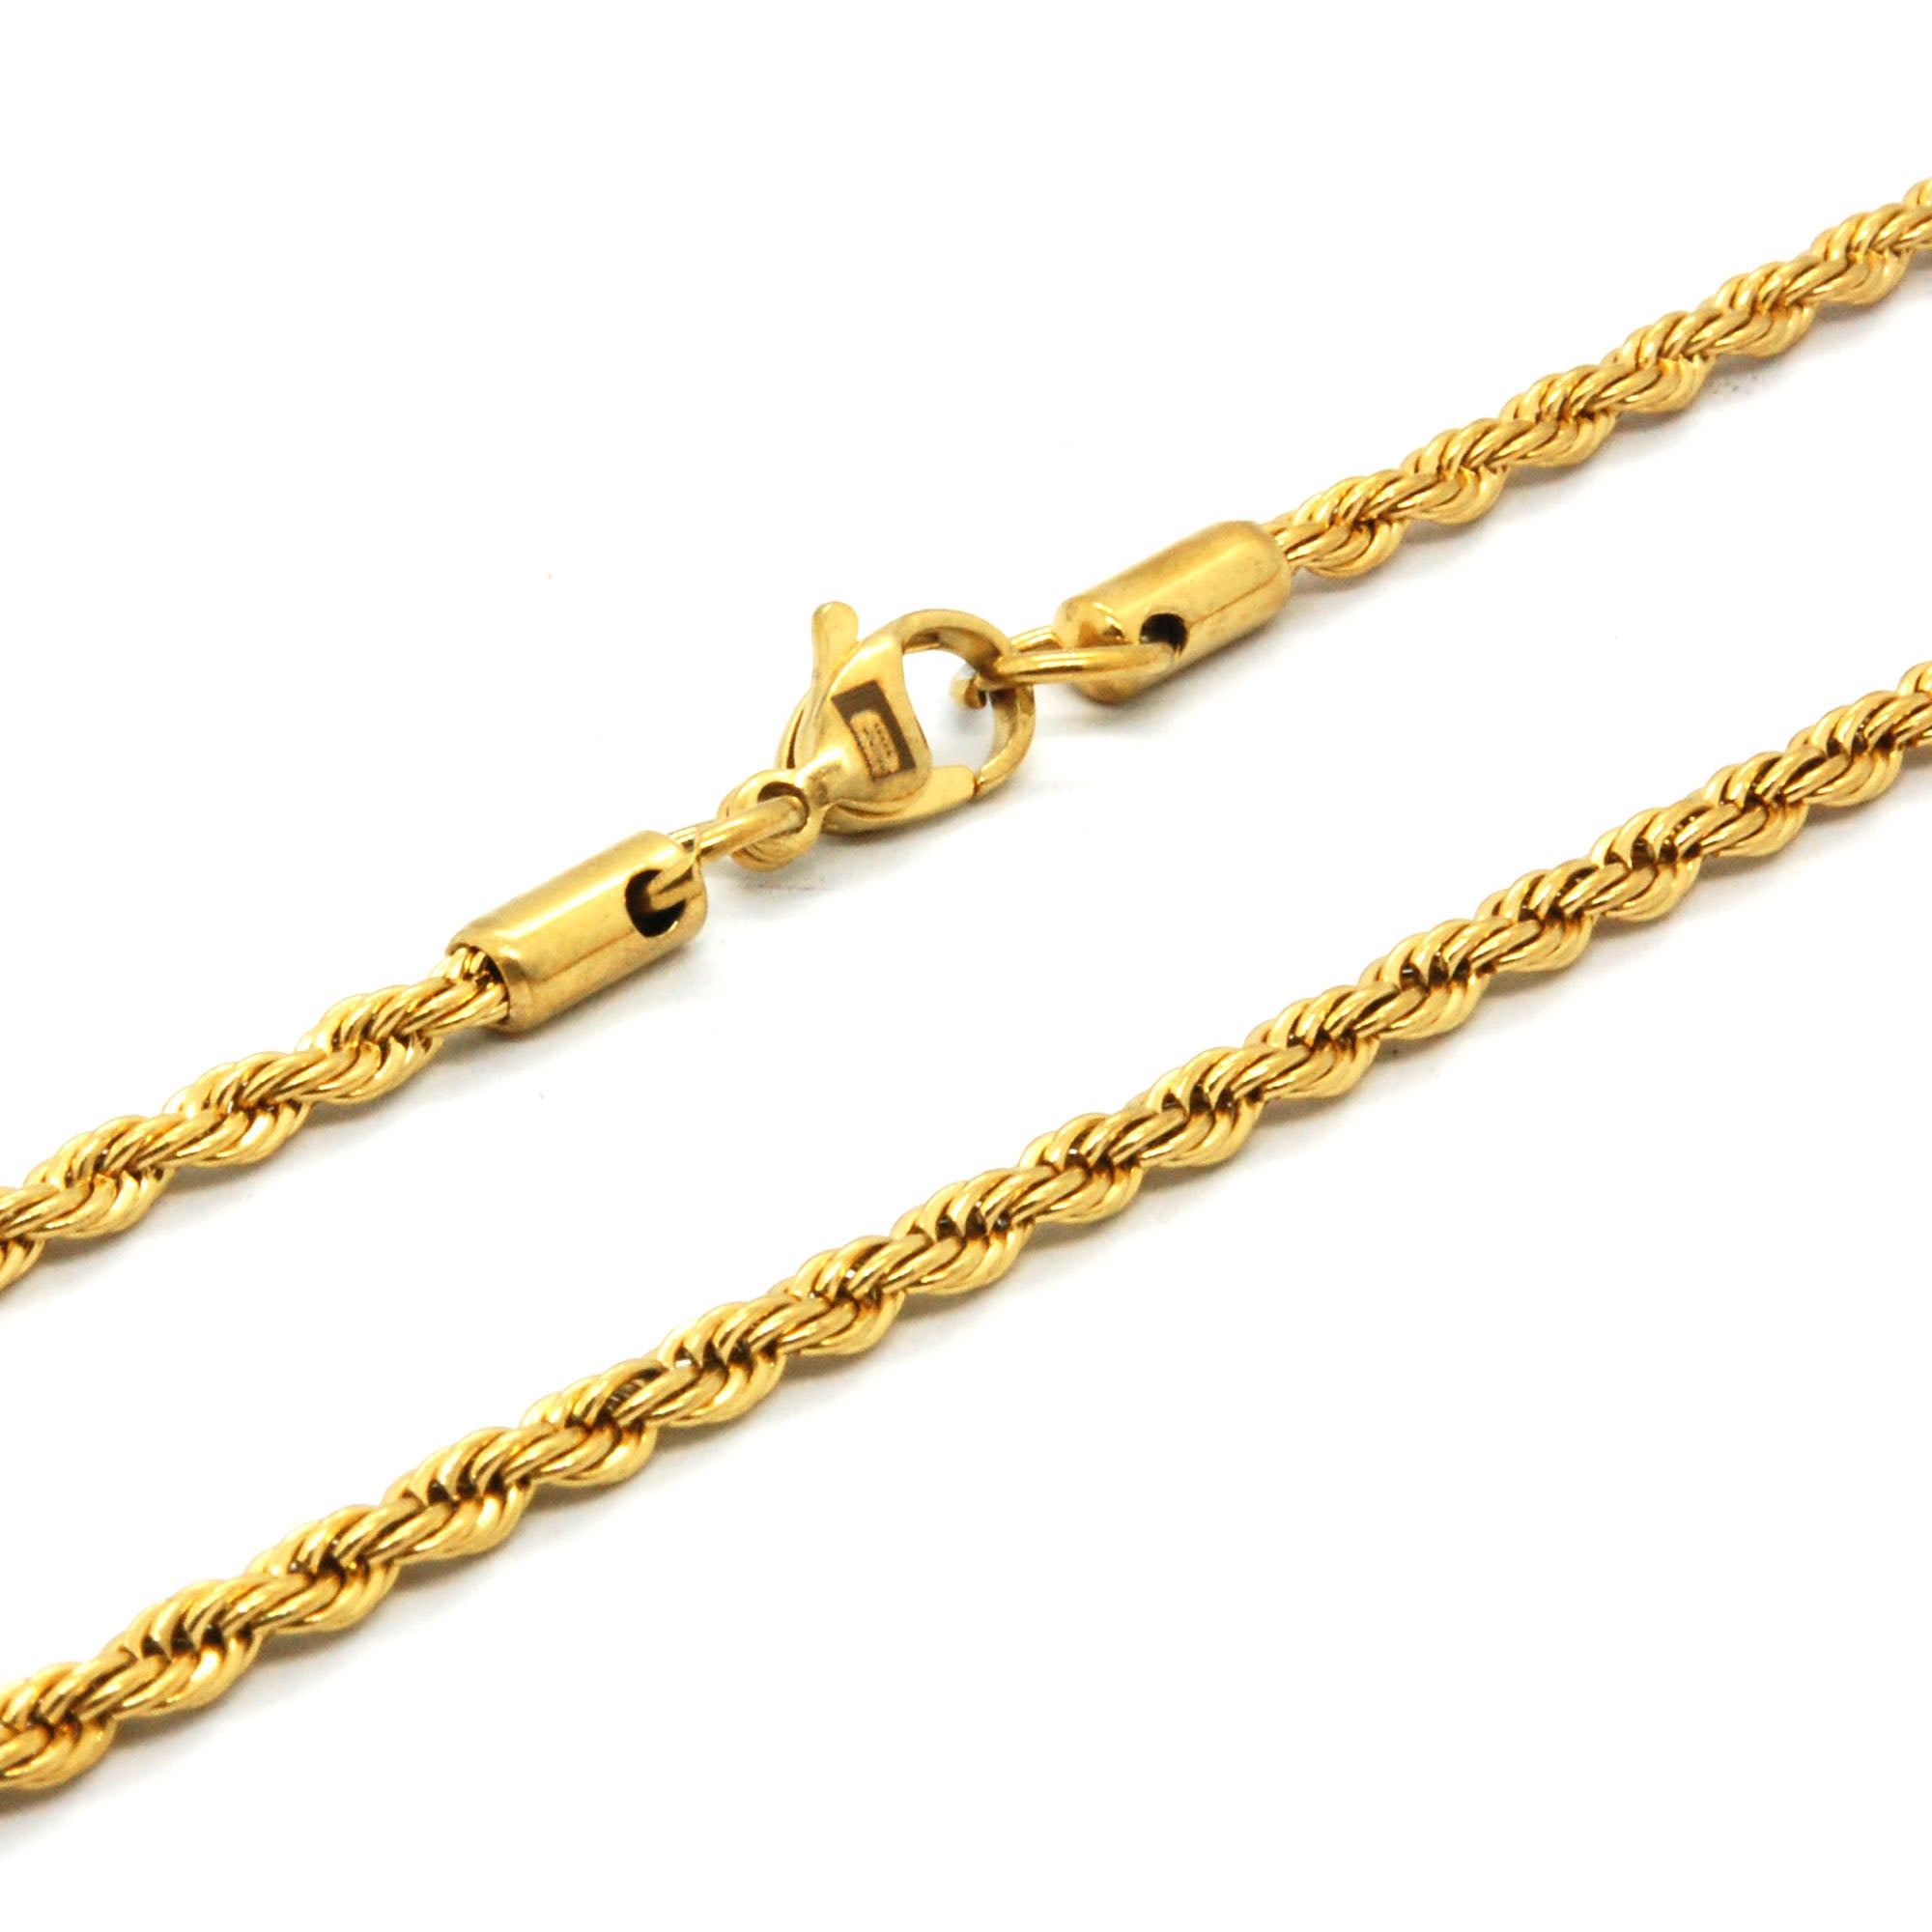 ESCH 7776: 23" All IPG Med Twisted Rope Chain (3mm)